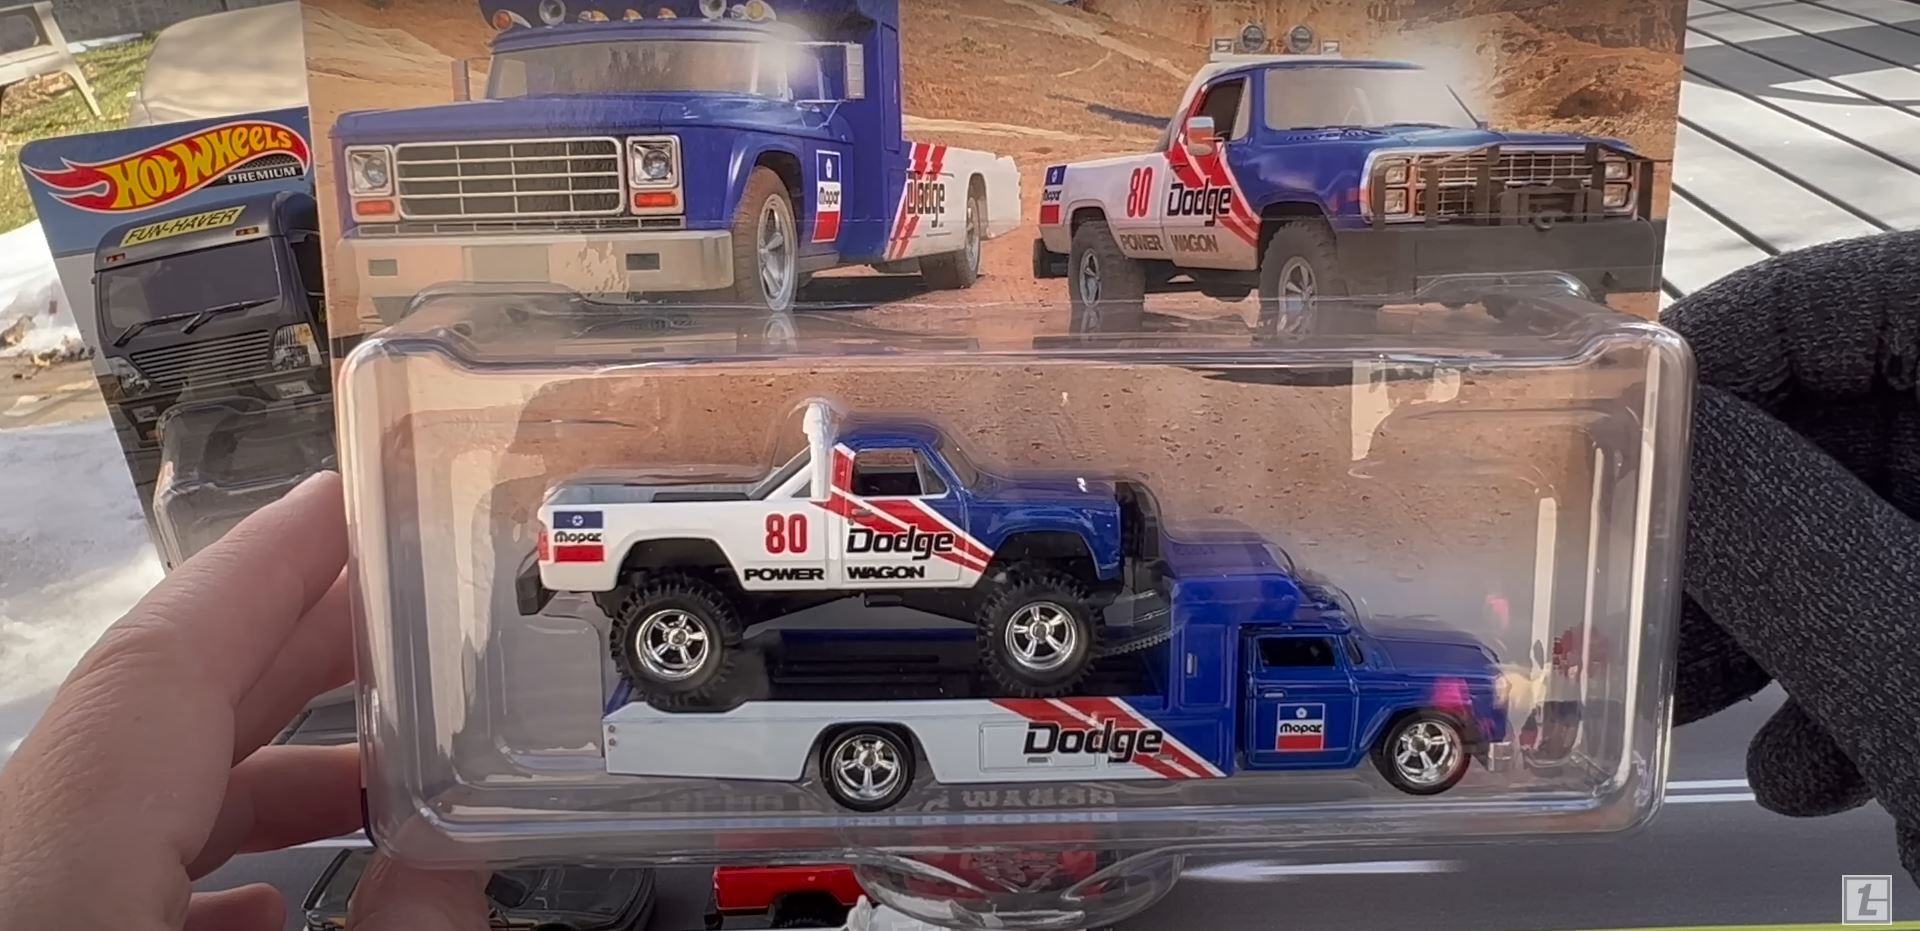 New Hot Wheels Team Transport Set Is A Combination Of American Muscle And Jdm Goodness 8219